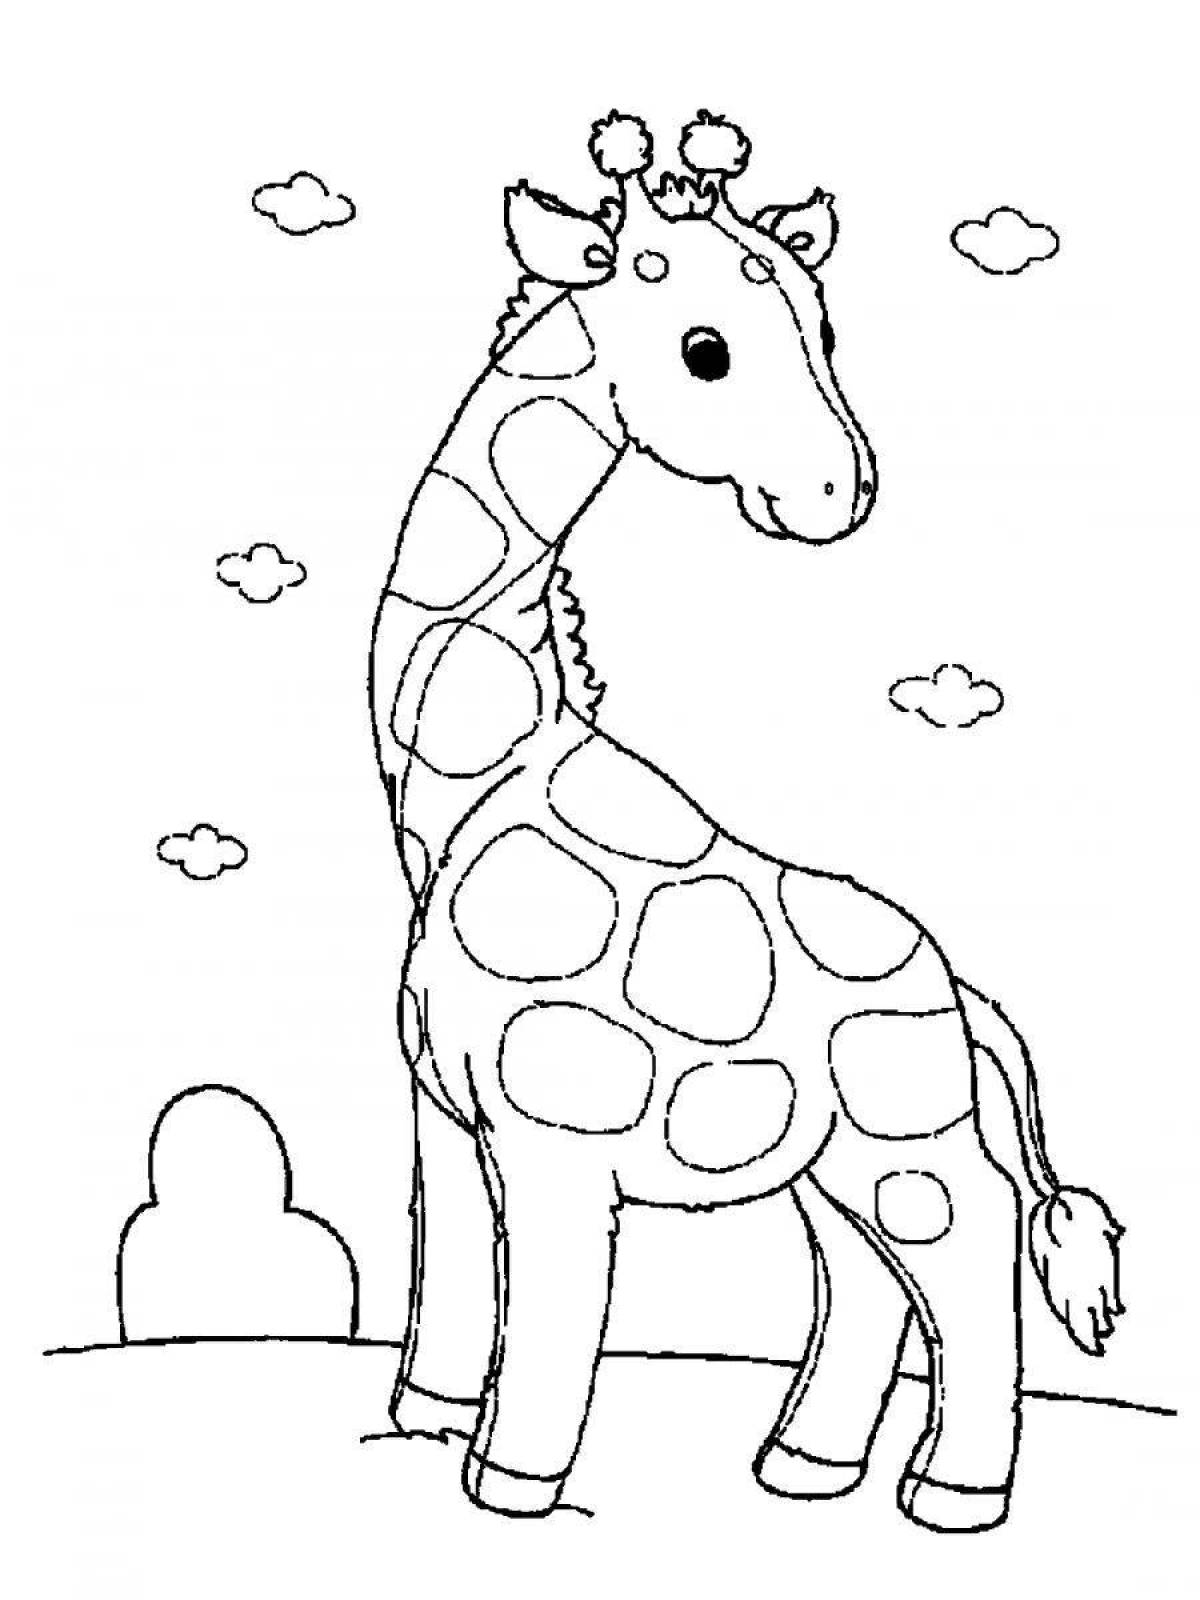 Irresistible coloring pages animals of hot countries for children 6-7 years old